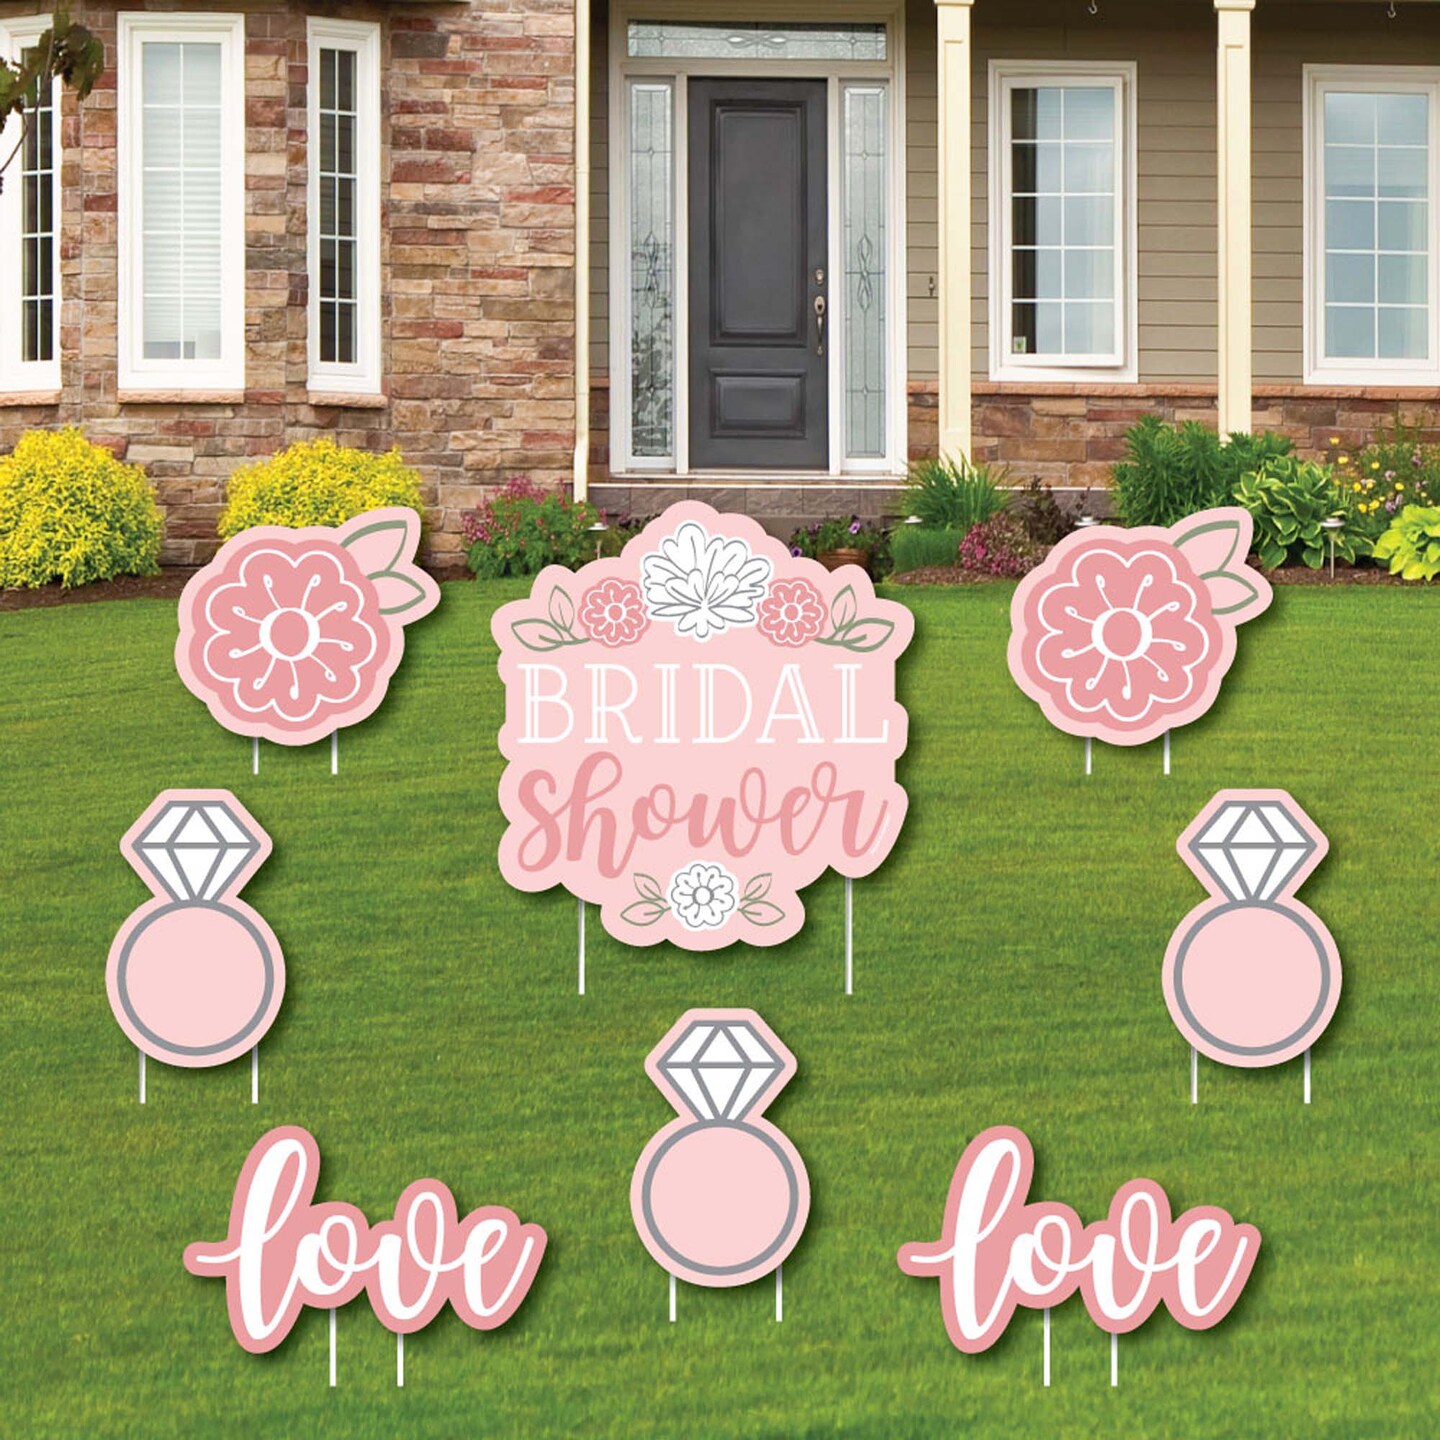 Big Dot of Happiness Floral Bridal Shower - Yard Sign and Outdoor Lawn Decorations - Pink Bridal Shower Yard Signs - Set of 8